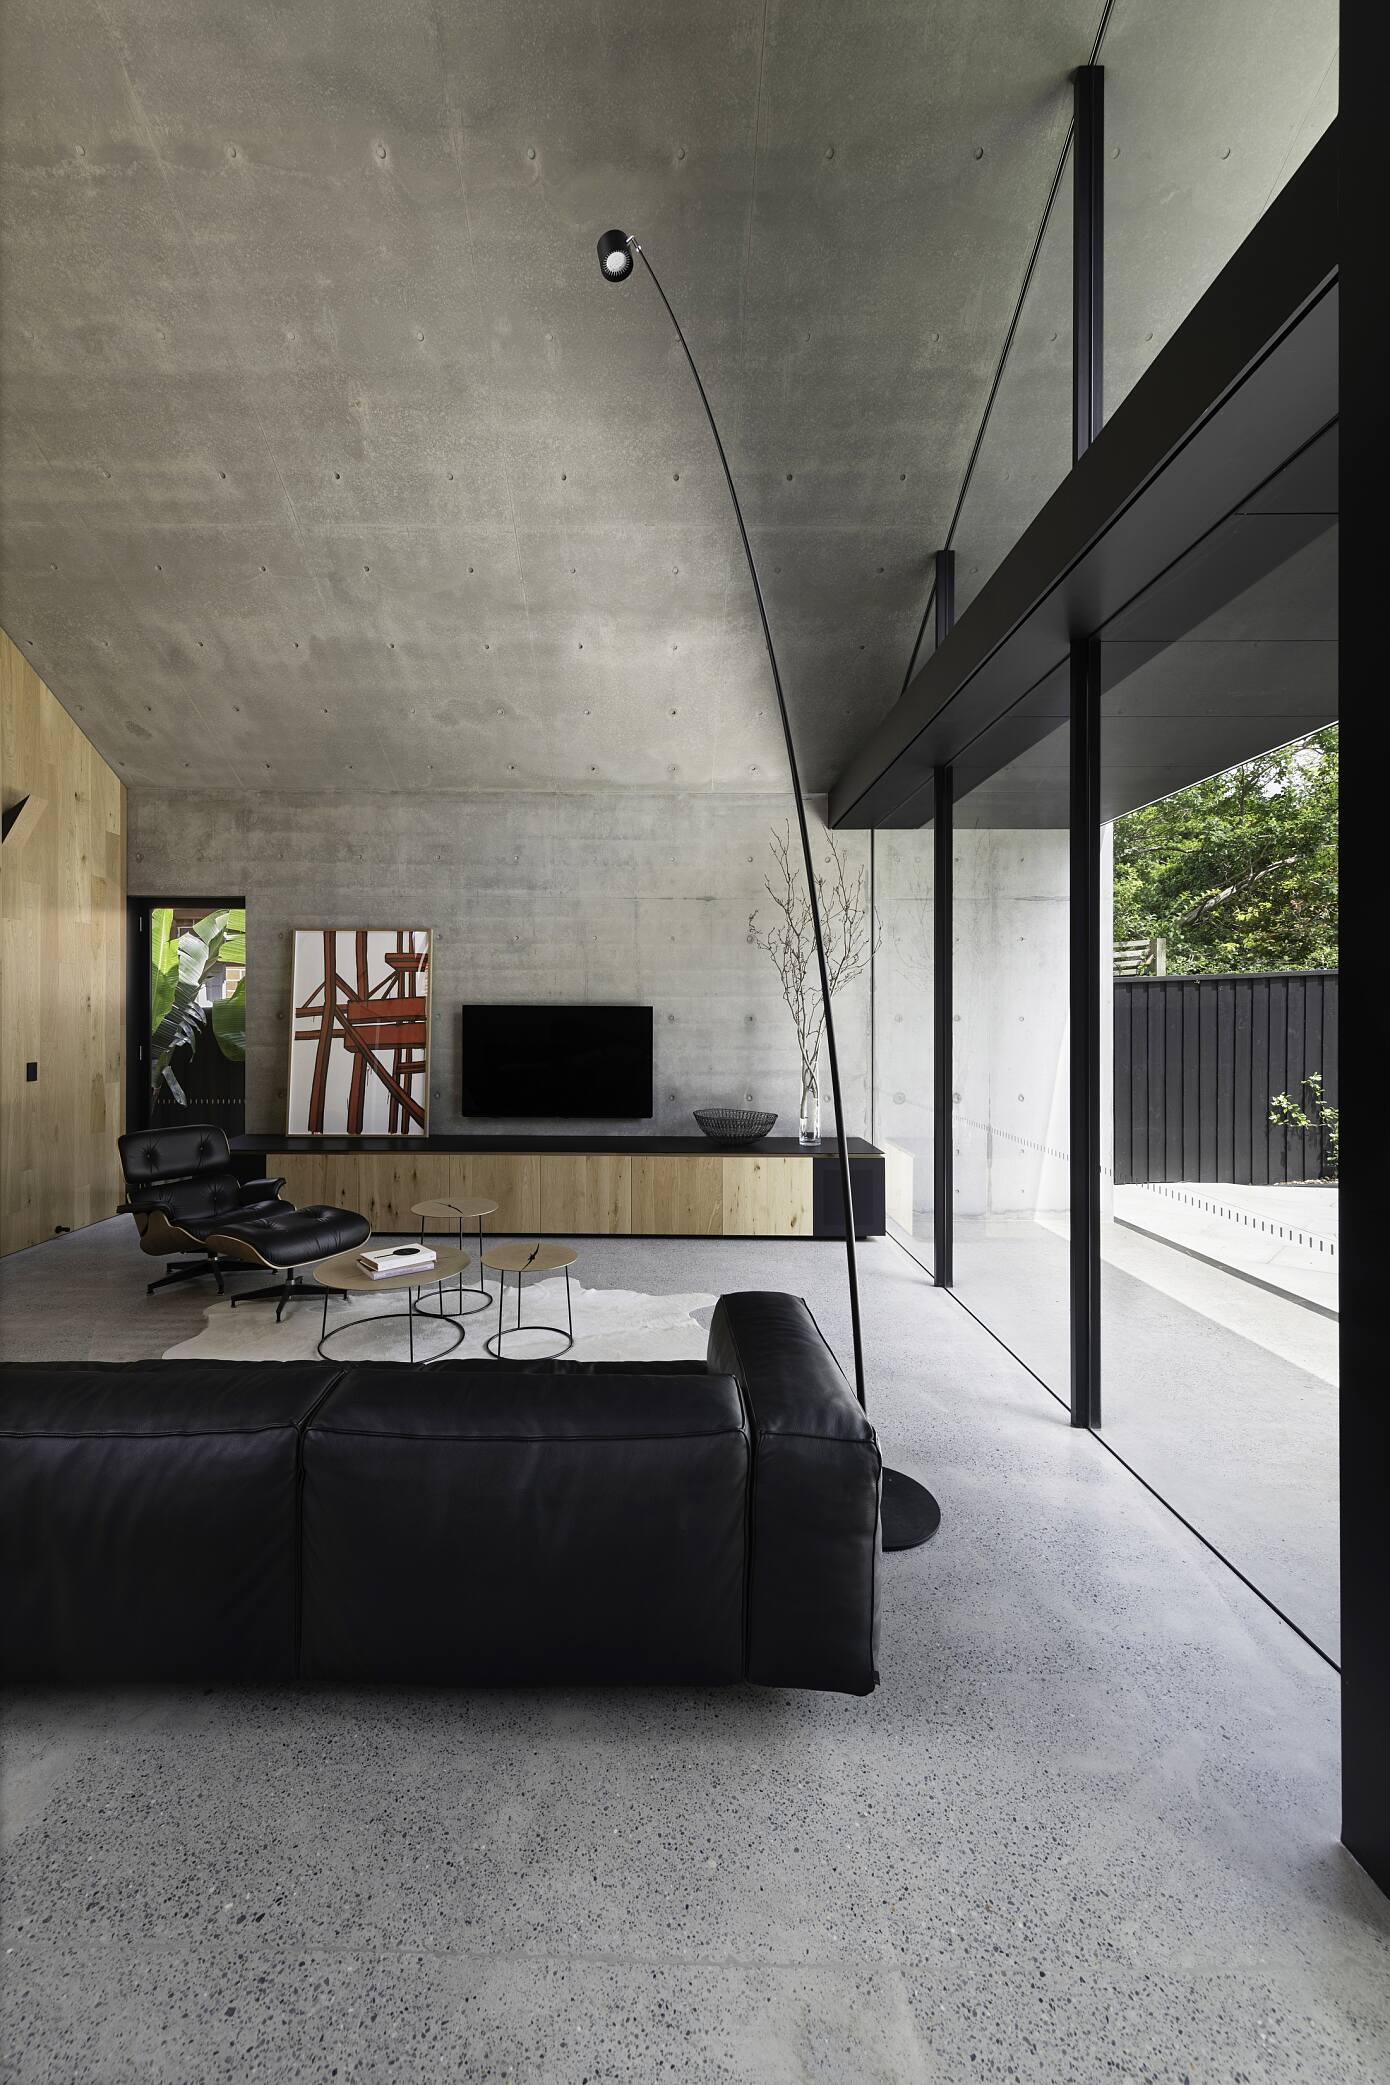 003-extruded-house-mck-architecture-interiors